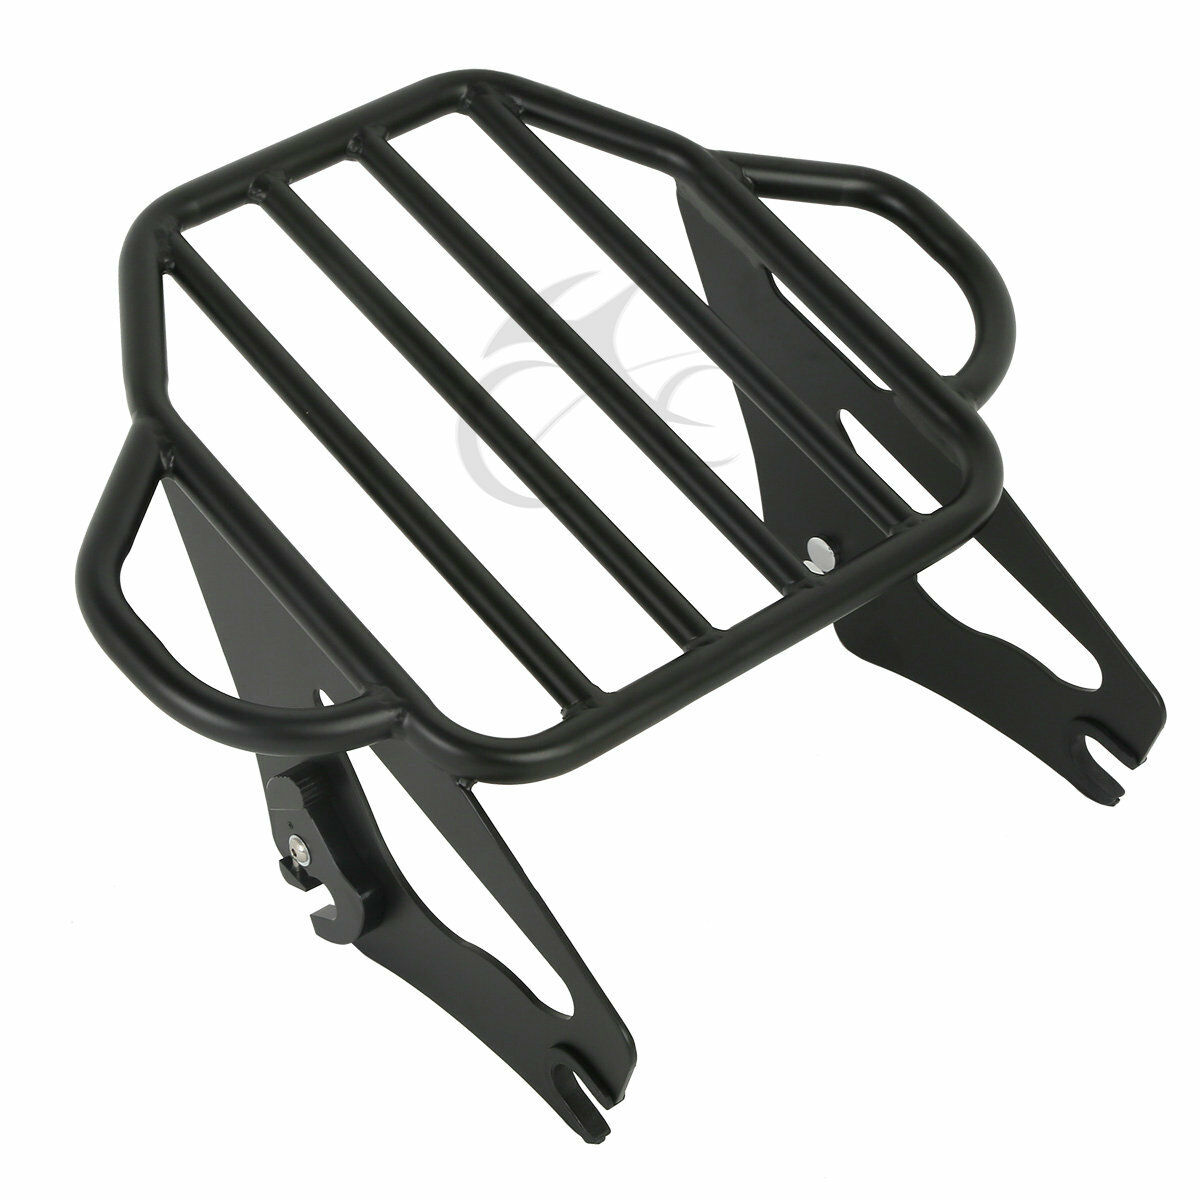 Detachable 2-up Luggage Rack Fit For Harley Touring Road King Street Glide 09-21